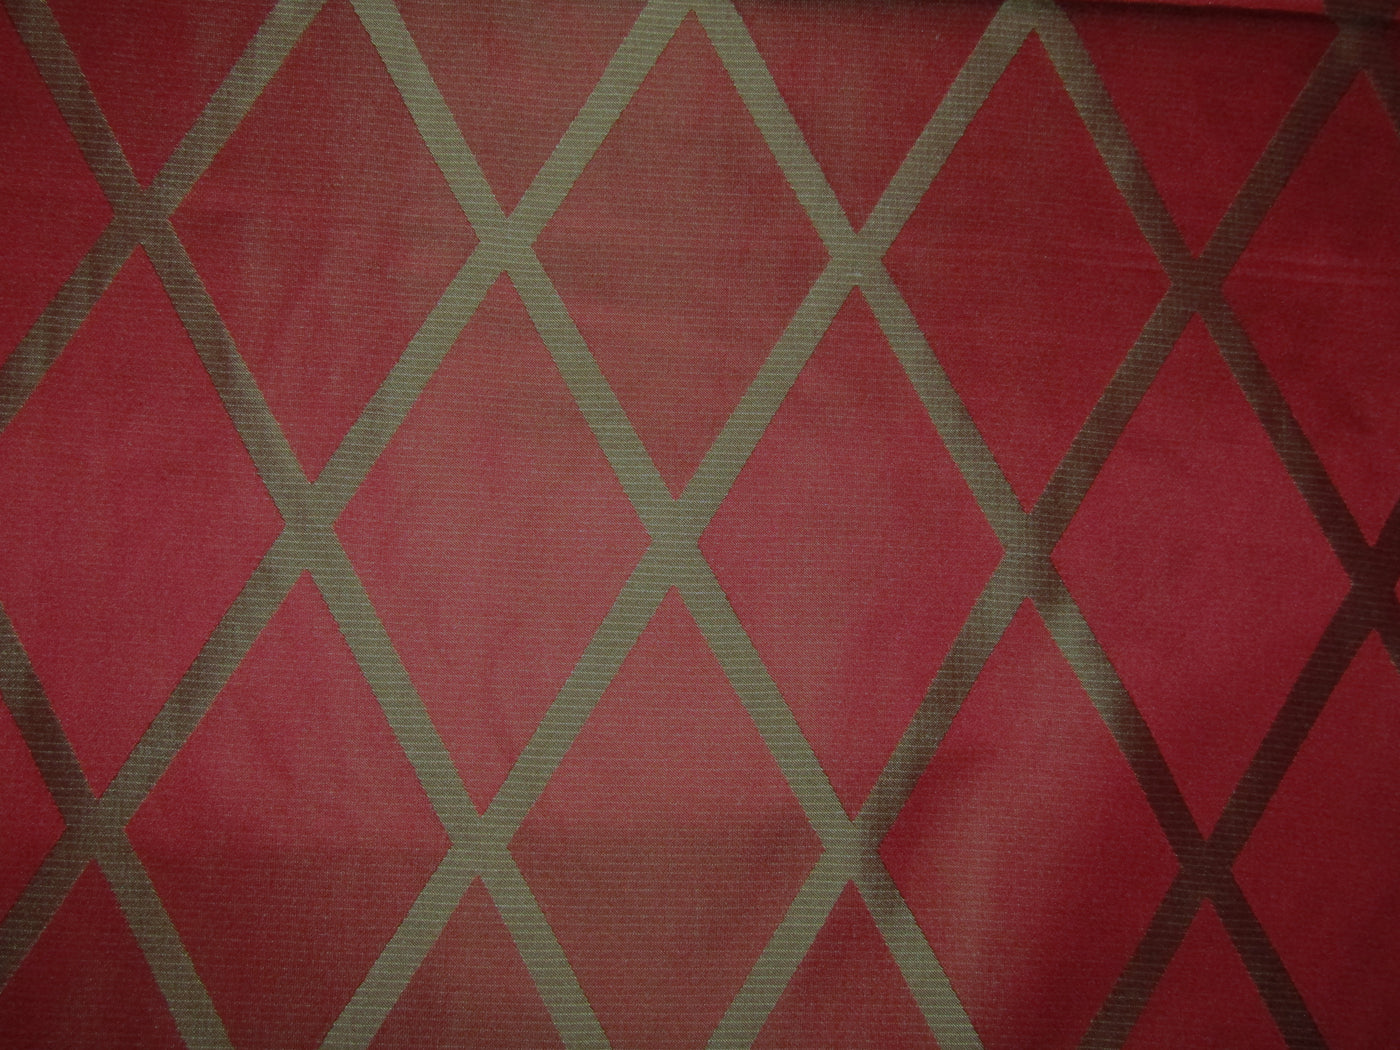 HEAVY SILK DAMASK JACQUARD FABRIC REVERSABLE BRICK RED AND GOLD WITH GEOMETRIC DESIGN  TAF#J25[1]